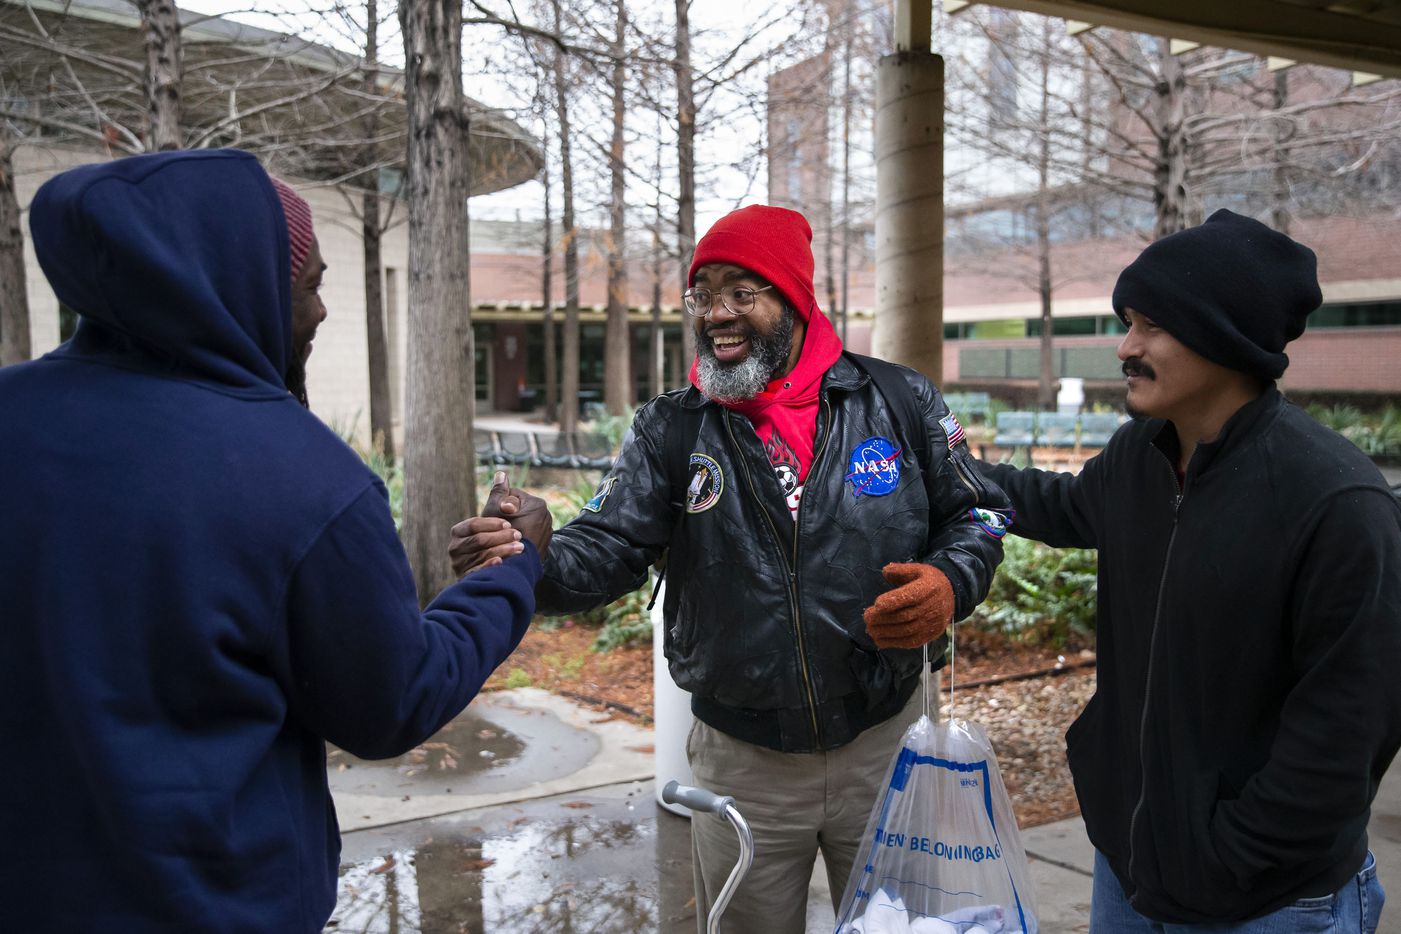 Randy greeted Rico Dukes (left) and Carlos Peña while walking around The Bridge Homeless Recovery Center in Dallas on Jan. 11, 2020. Randy lived at The Bridge for over a year while he navigated social services that could help him afford and secure a two-bedroom apartment with his $1,400-a-month disability income.